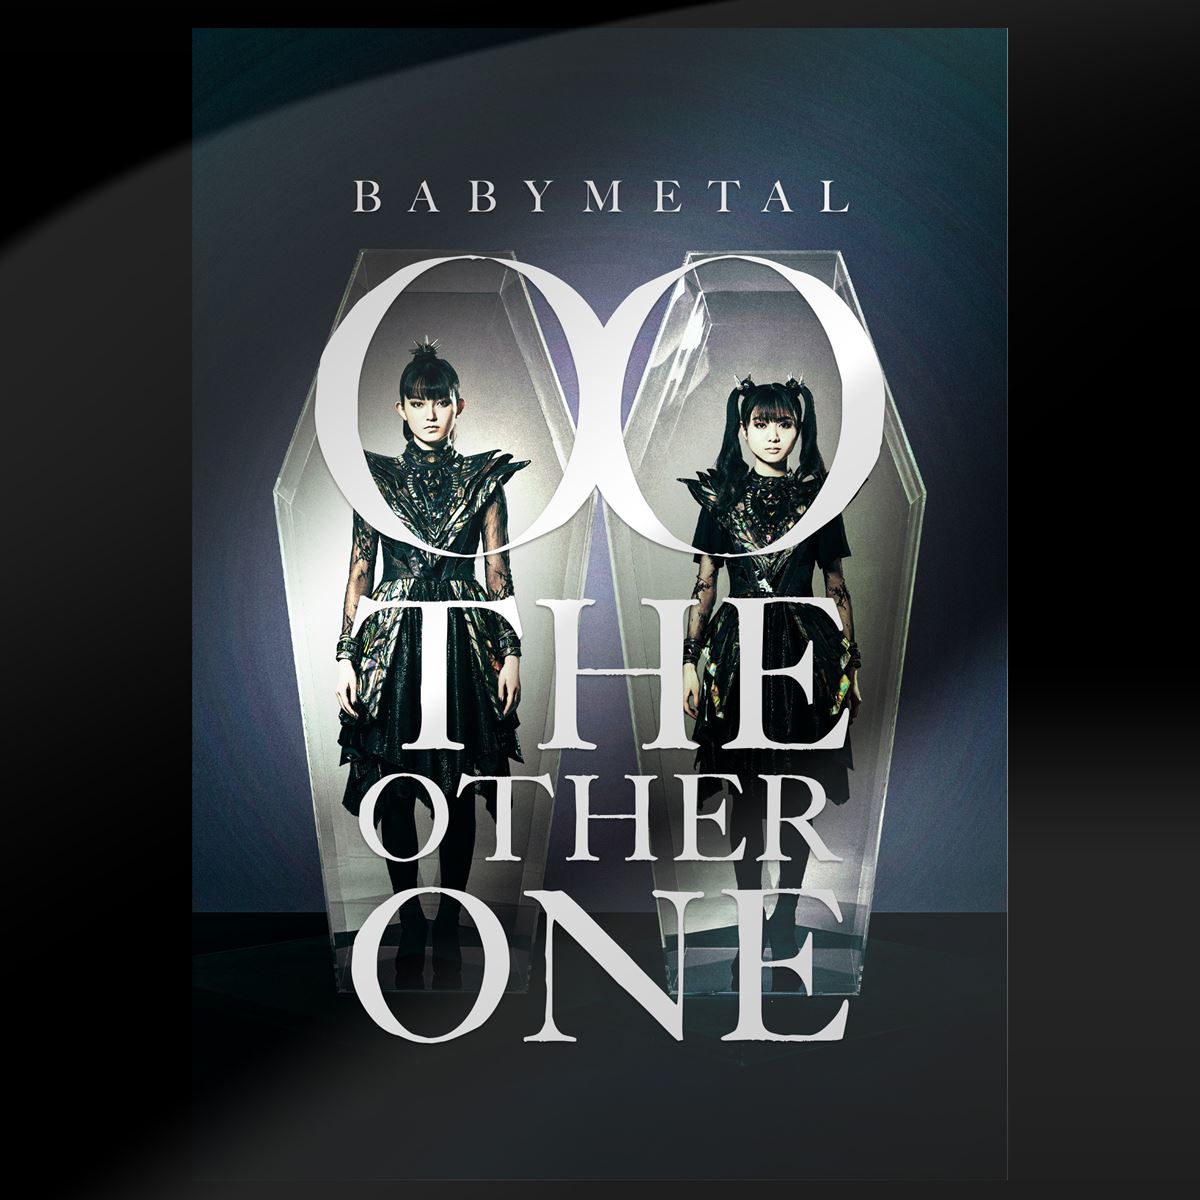 BABYMETAL、初のコンセプトアルバム『THE OTHER ONE』収録詳細